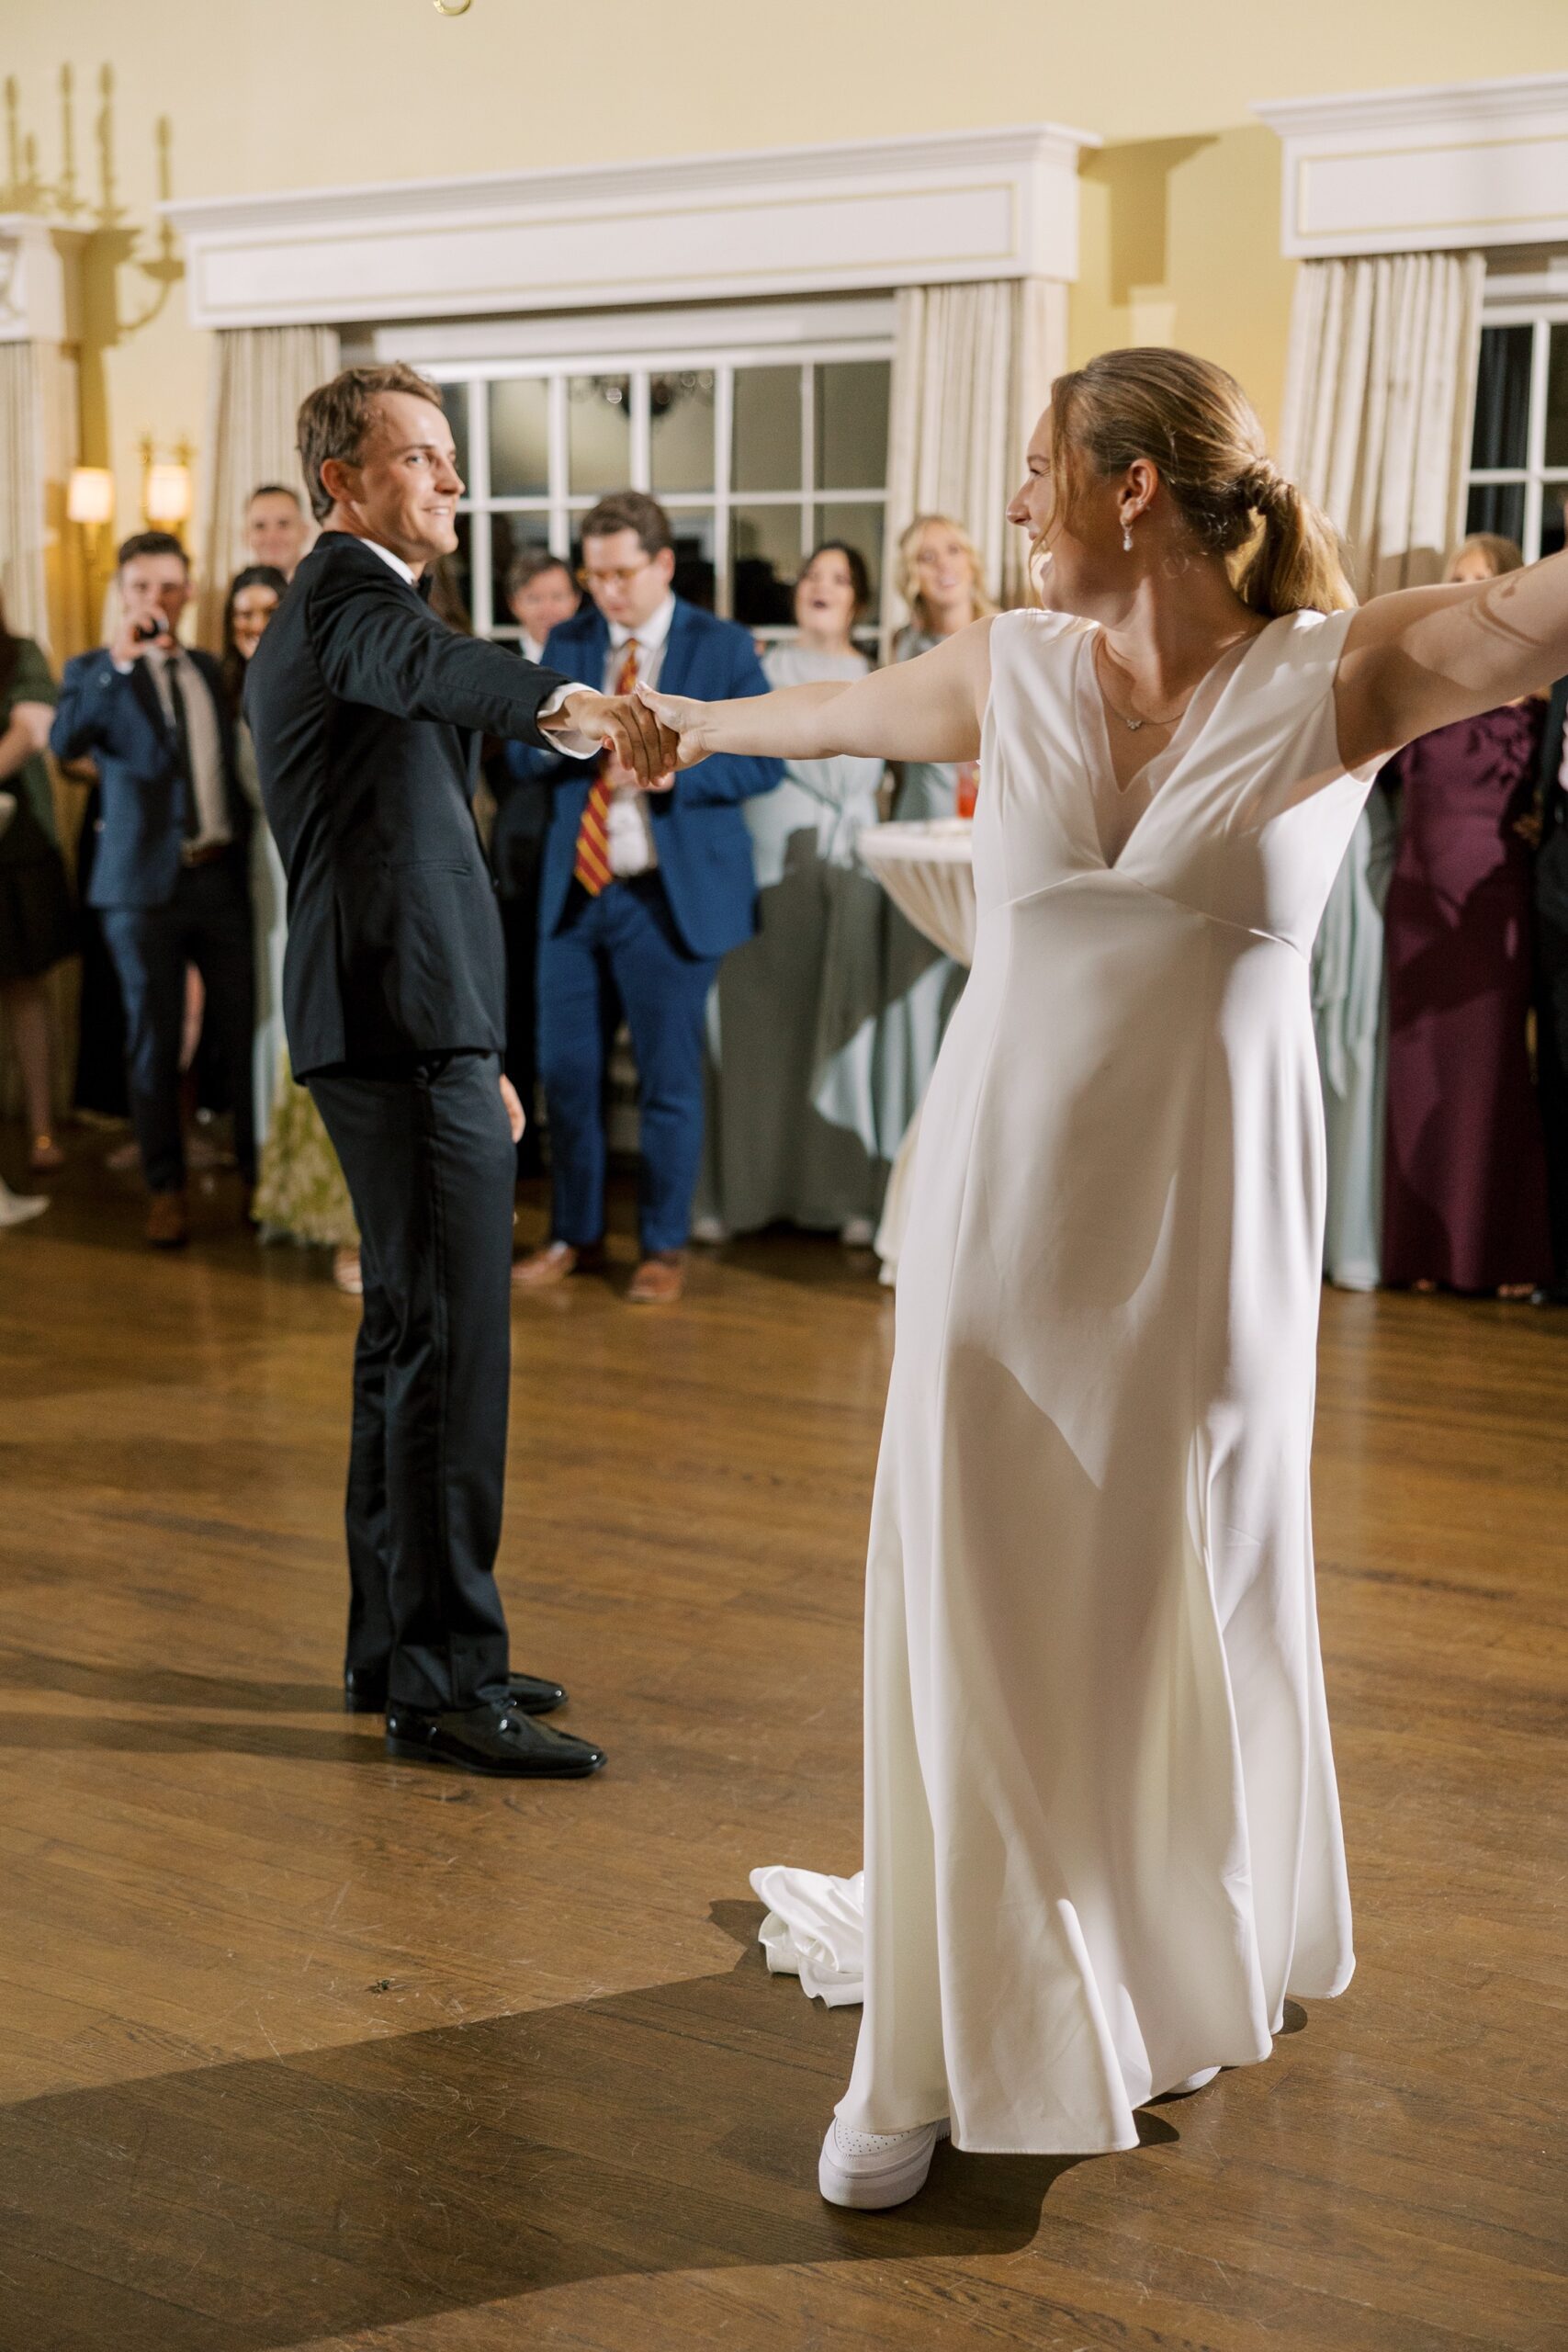 The bride and groom danced together at the Westmoreland Country Club wedding reception